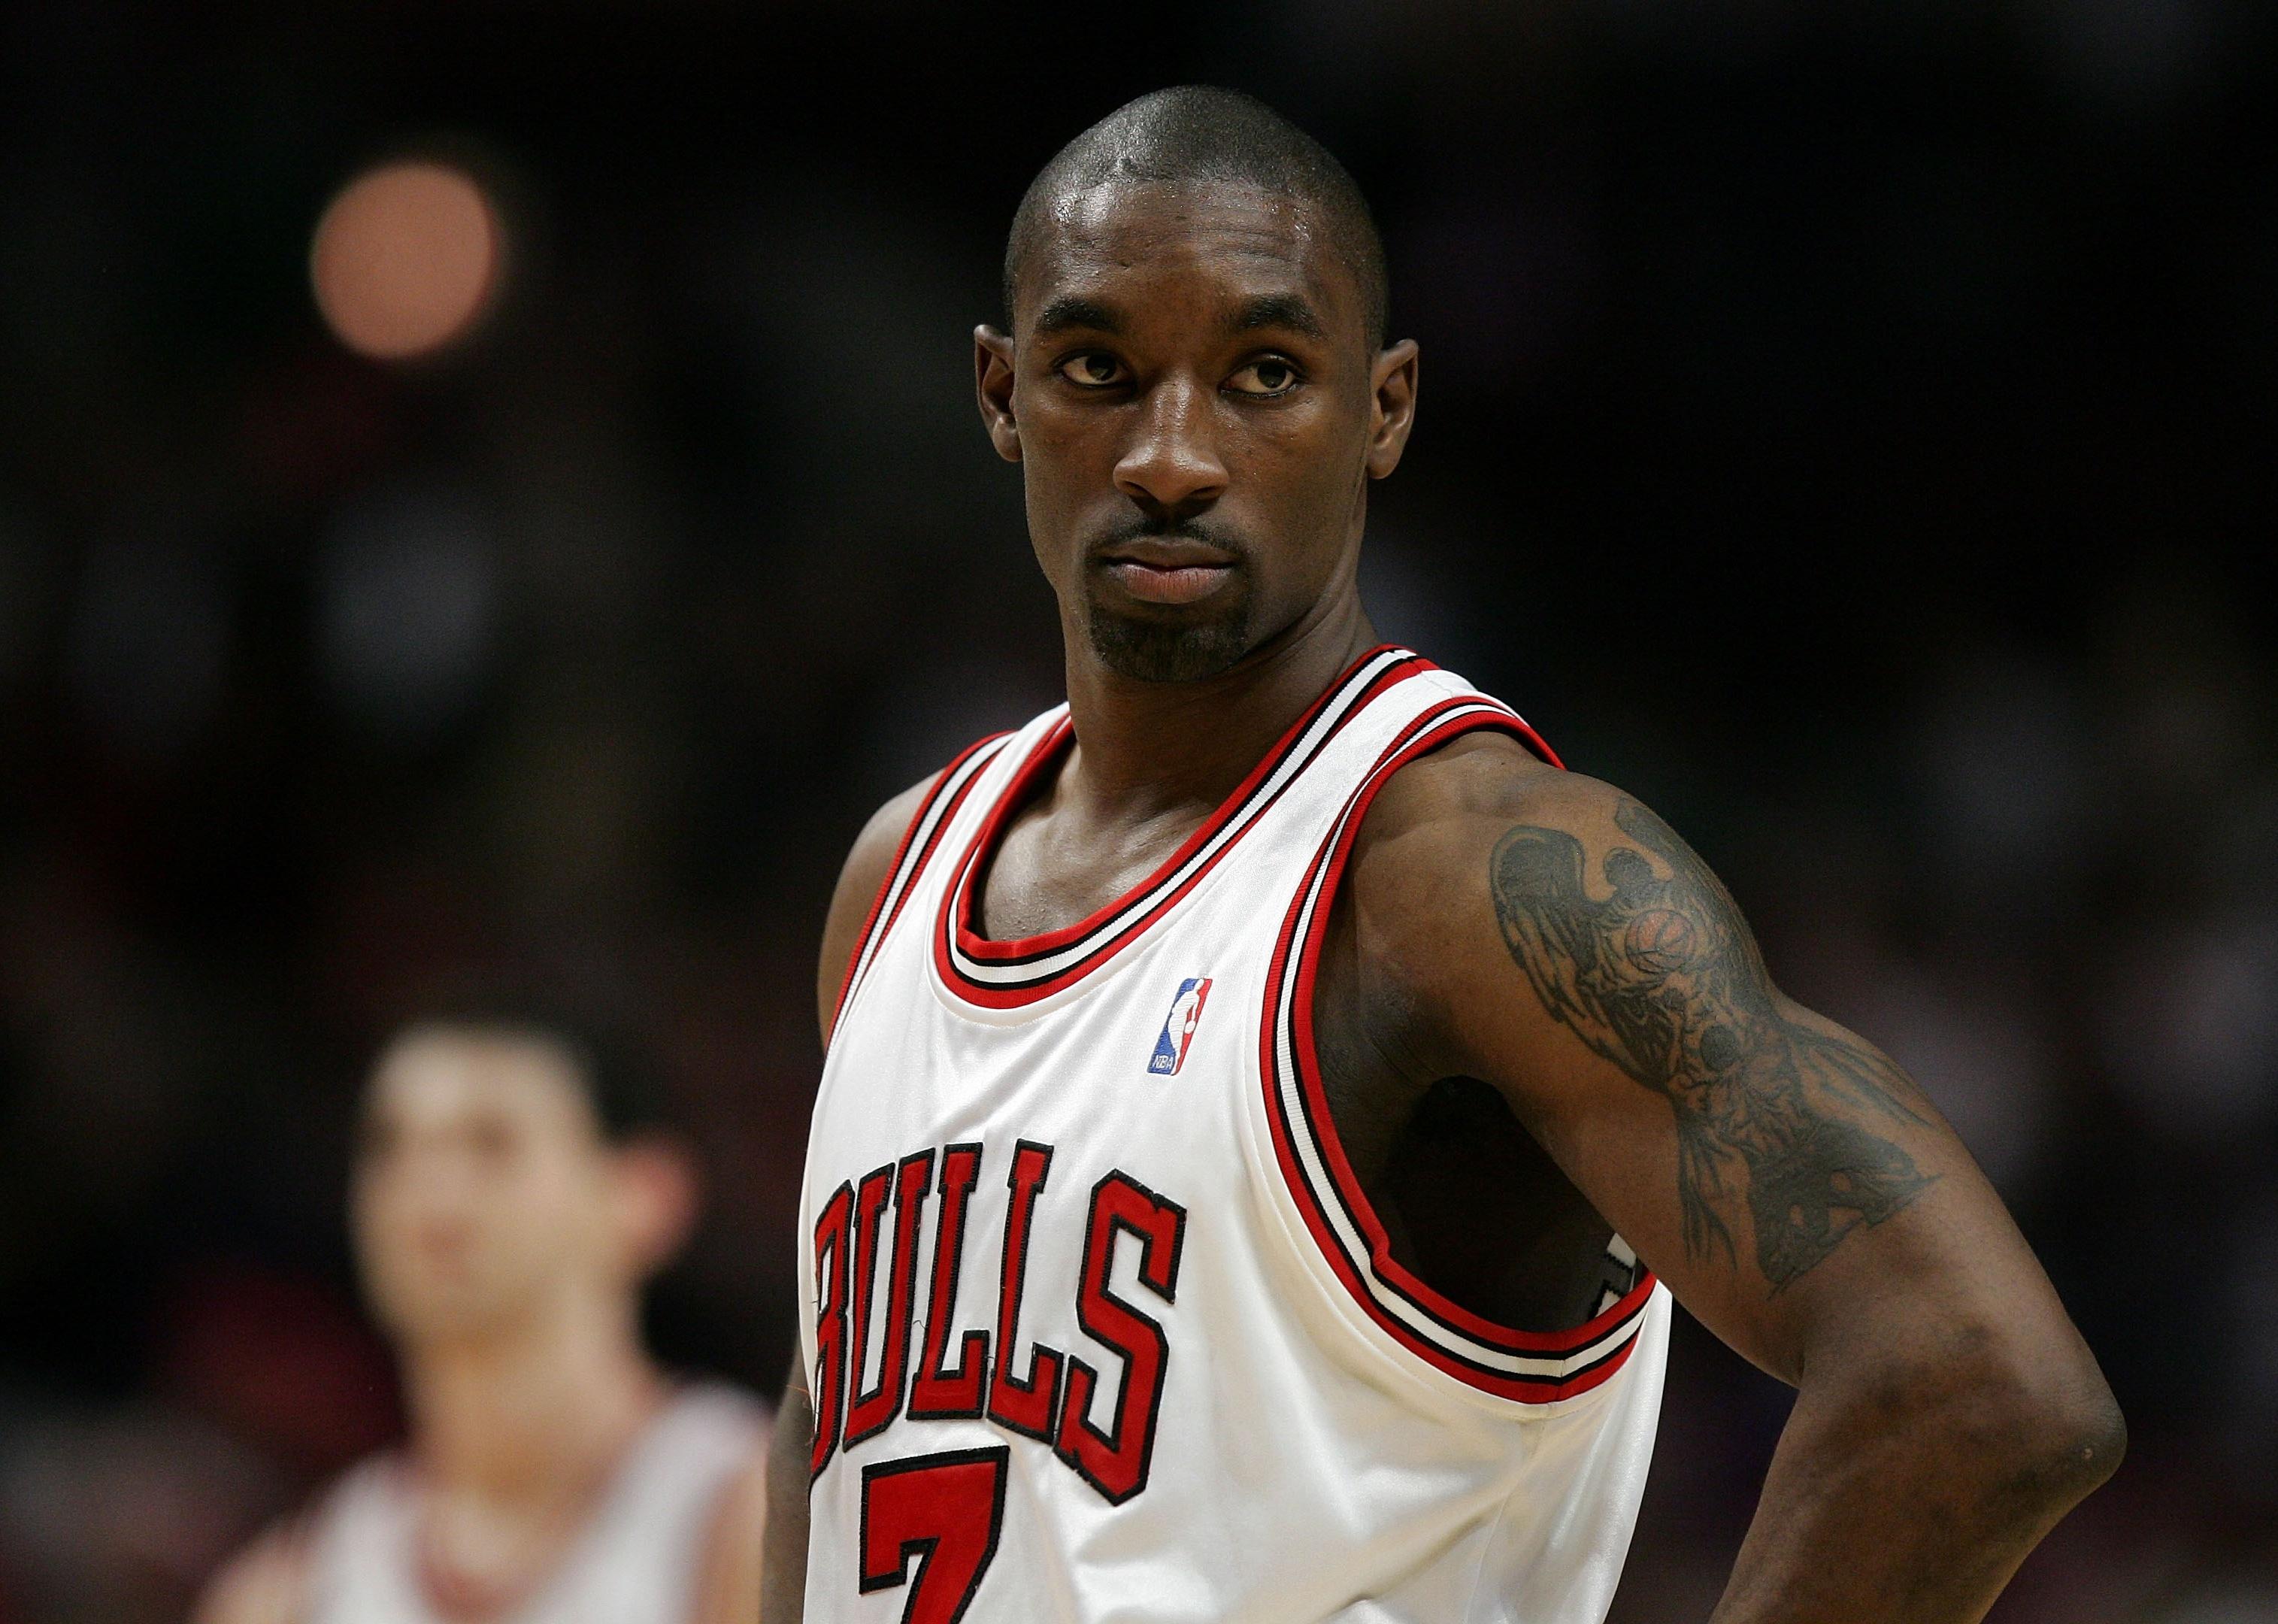 Ben Gordon on the court during a game at the United Center in Chicago.